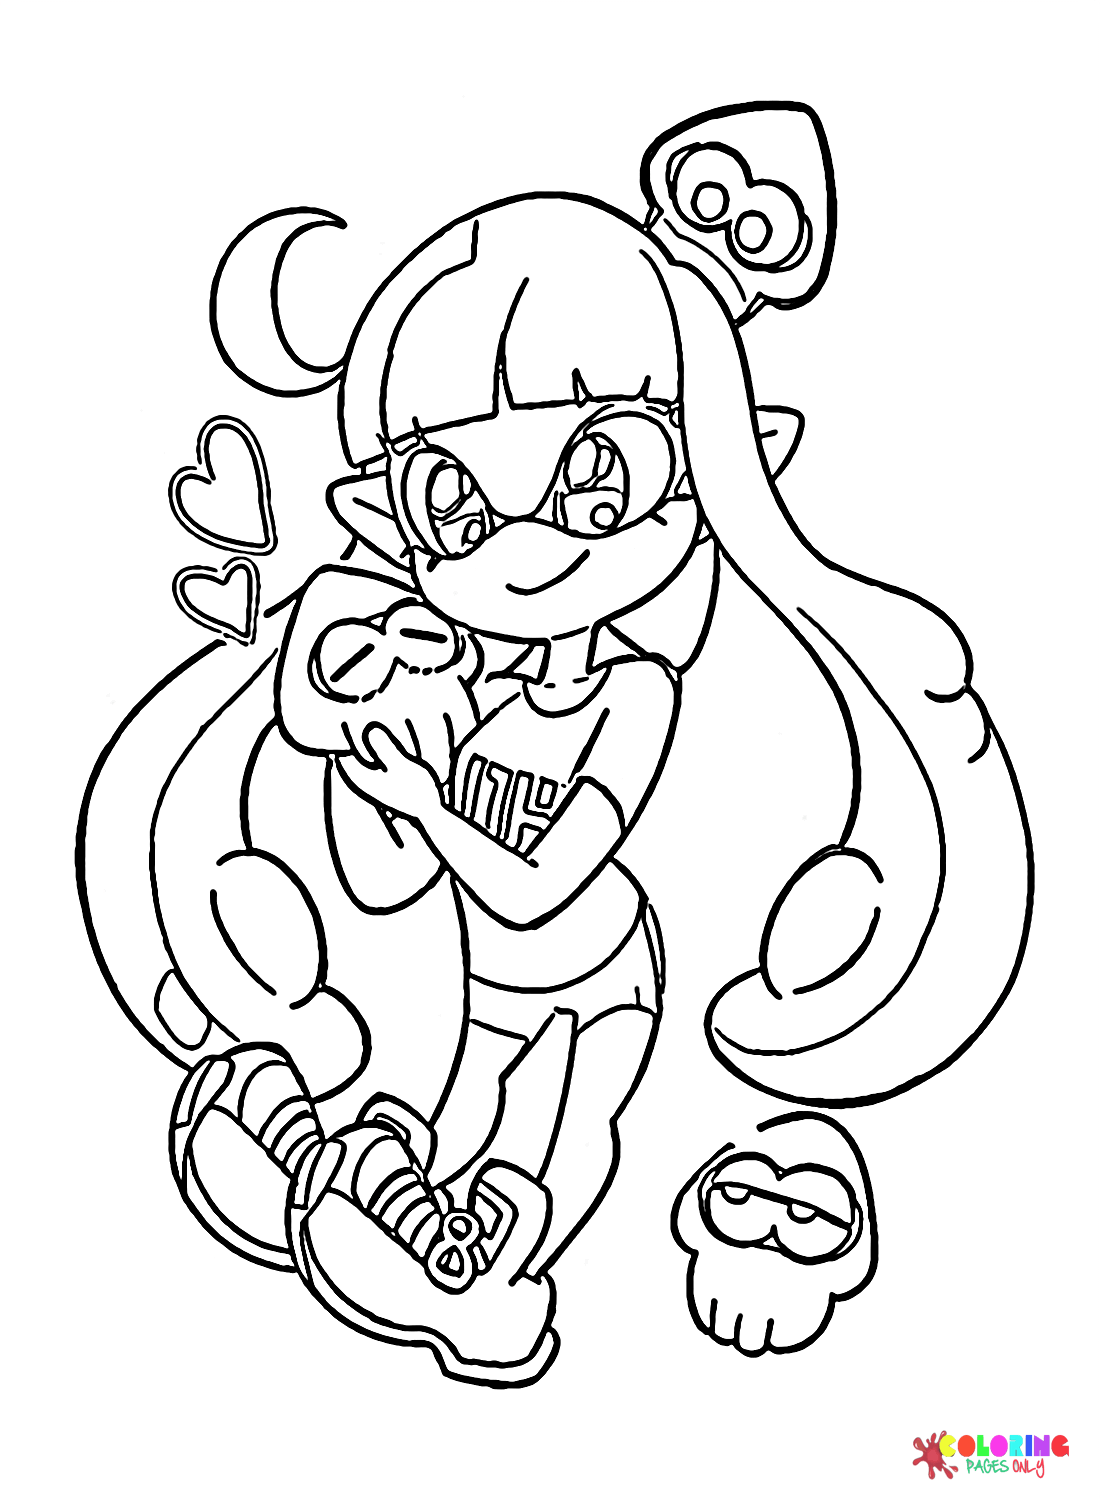 Cartoon Splatoon Coloring Page - Free Printable Coloring Pages